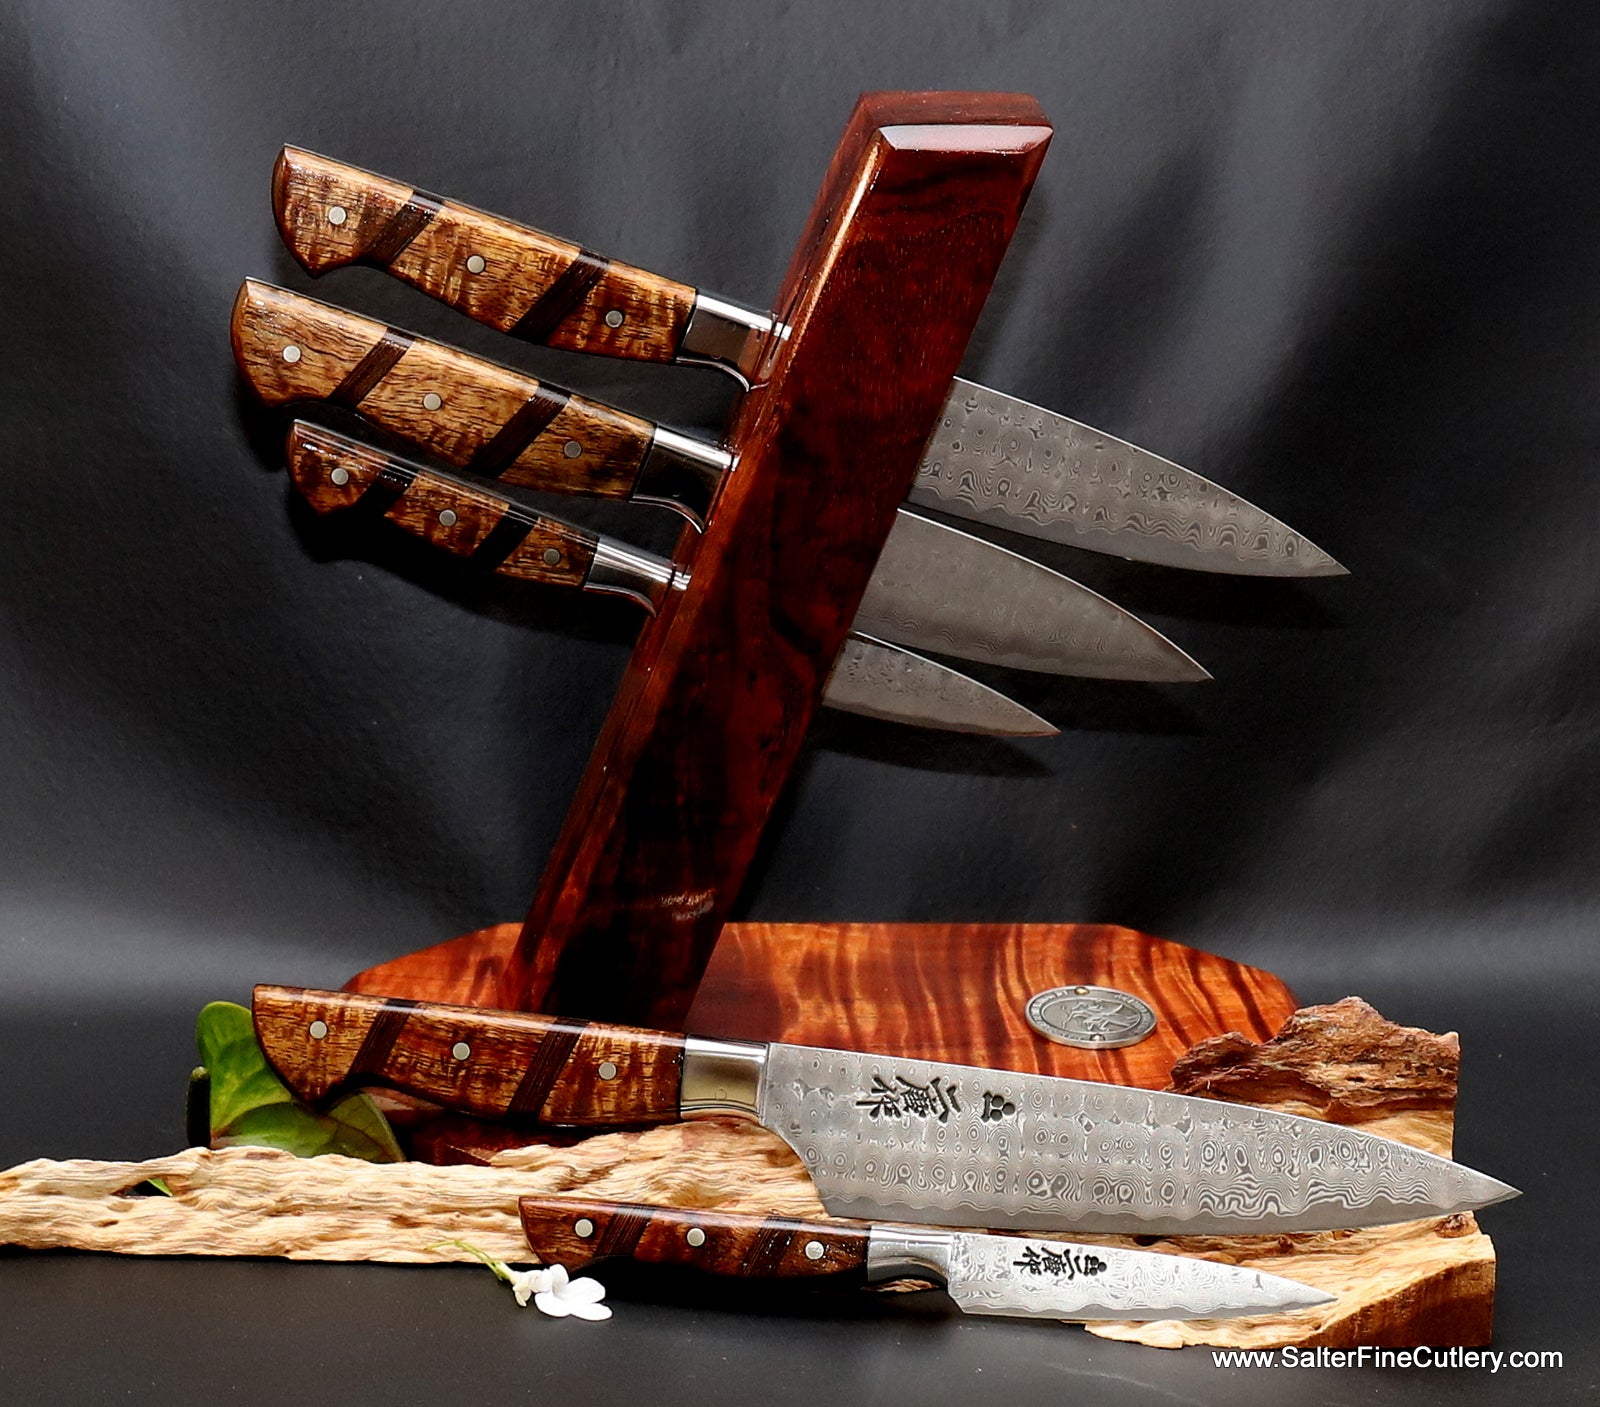 Custom handmade Charybdis design chef knives with full tang handles luxury kitchen knives from Salter Fine Cutlery